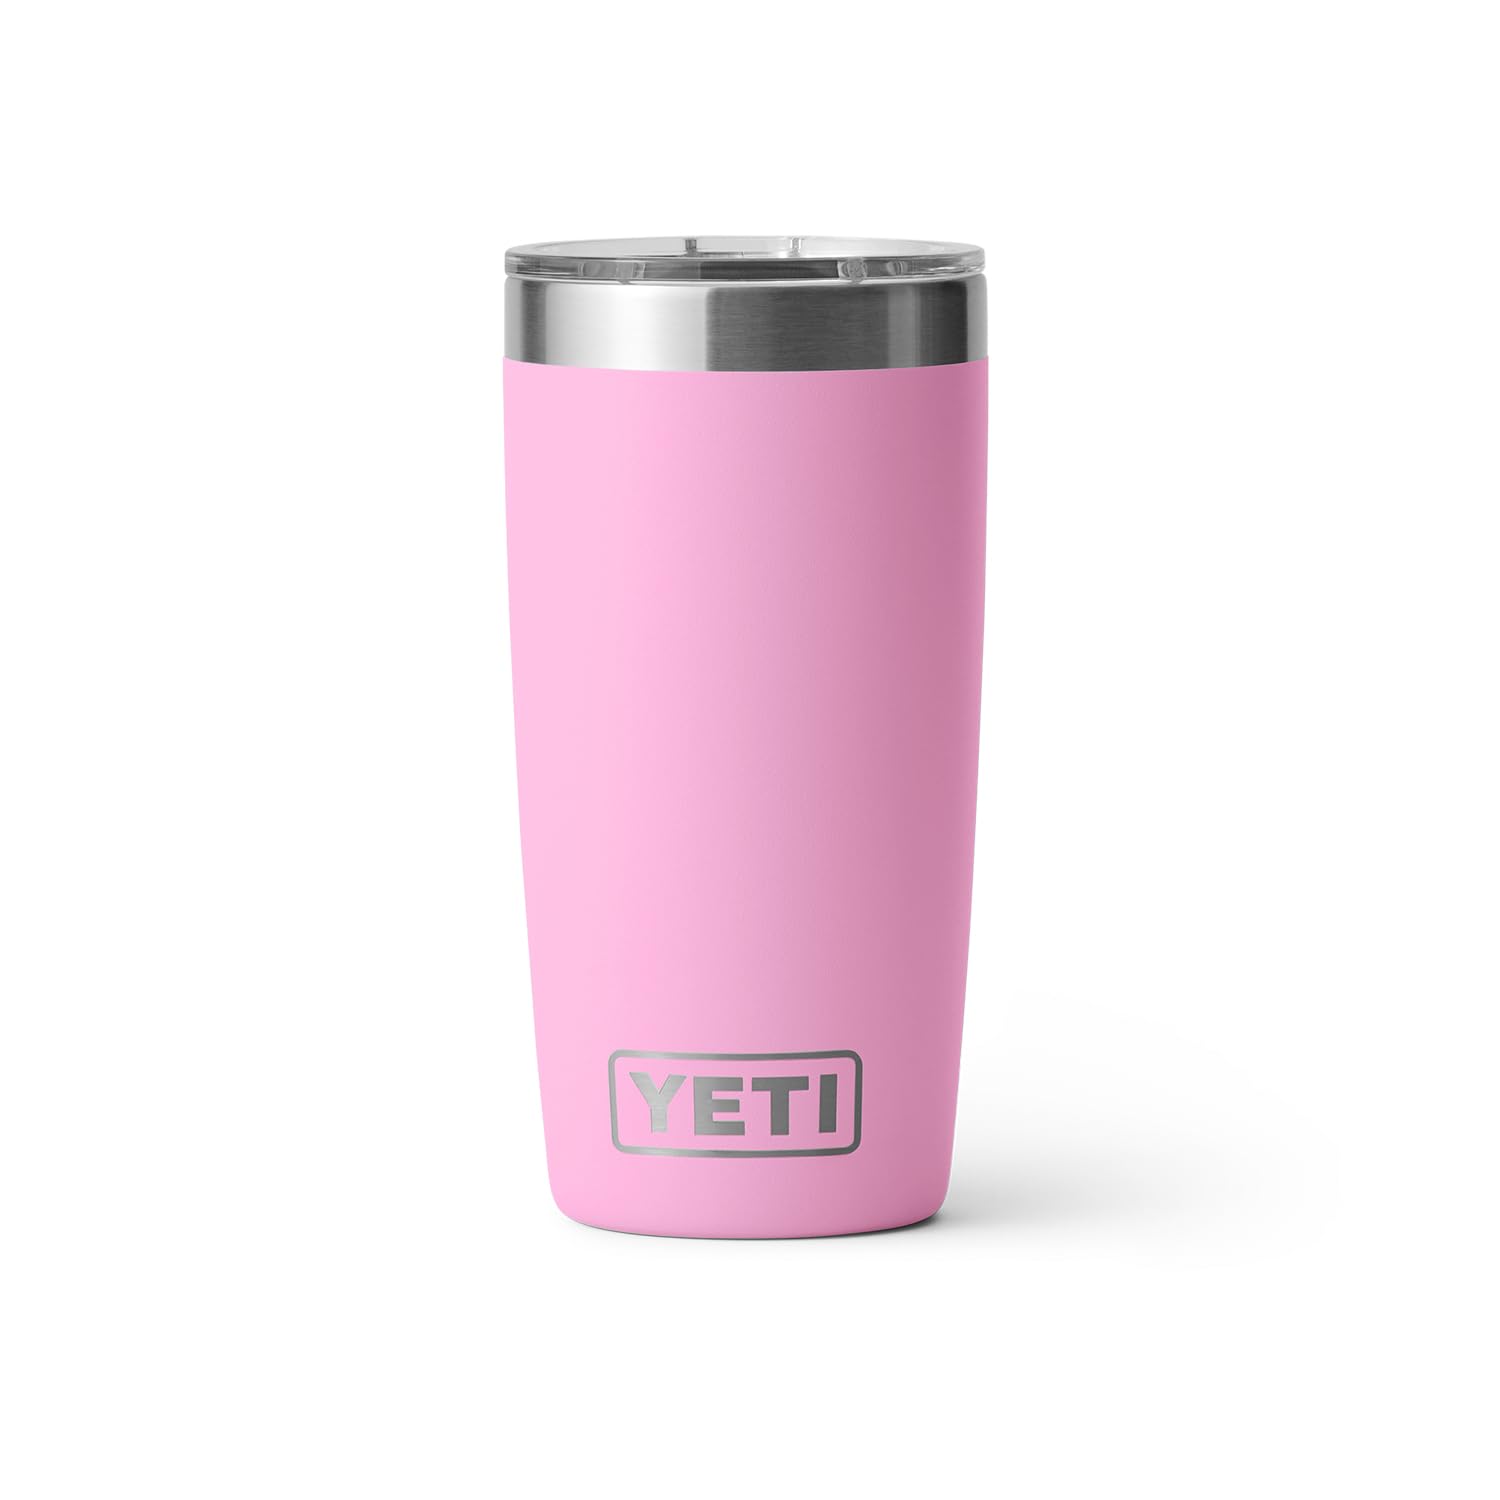 YETI Rambler 10 oz Tumbler, Stainless Steel, Vacuum Insulated with MagSlider Lid, Power Pink